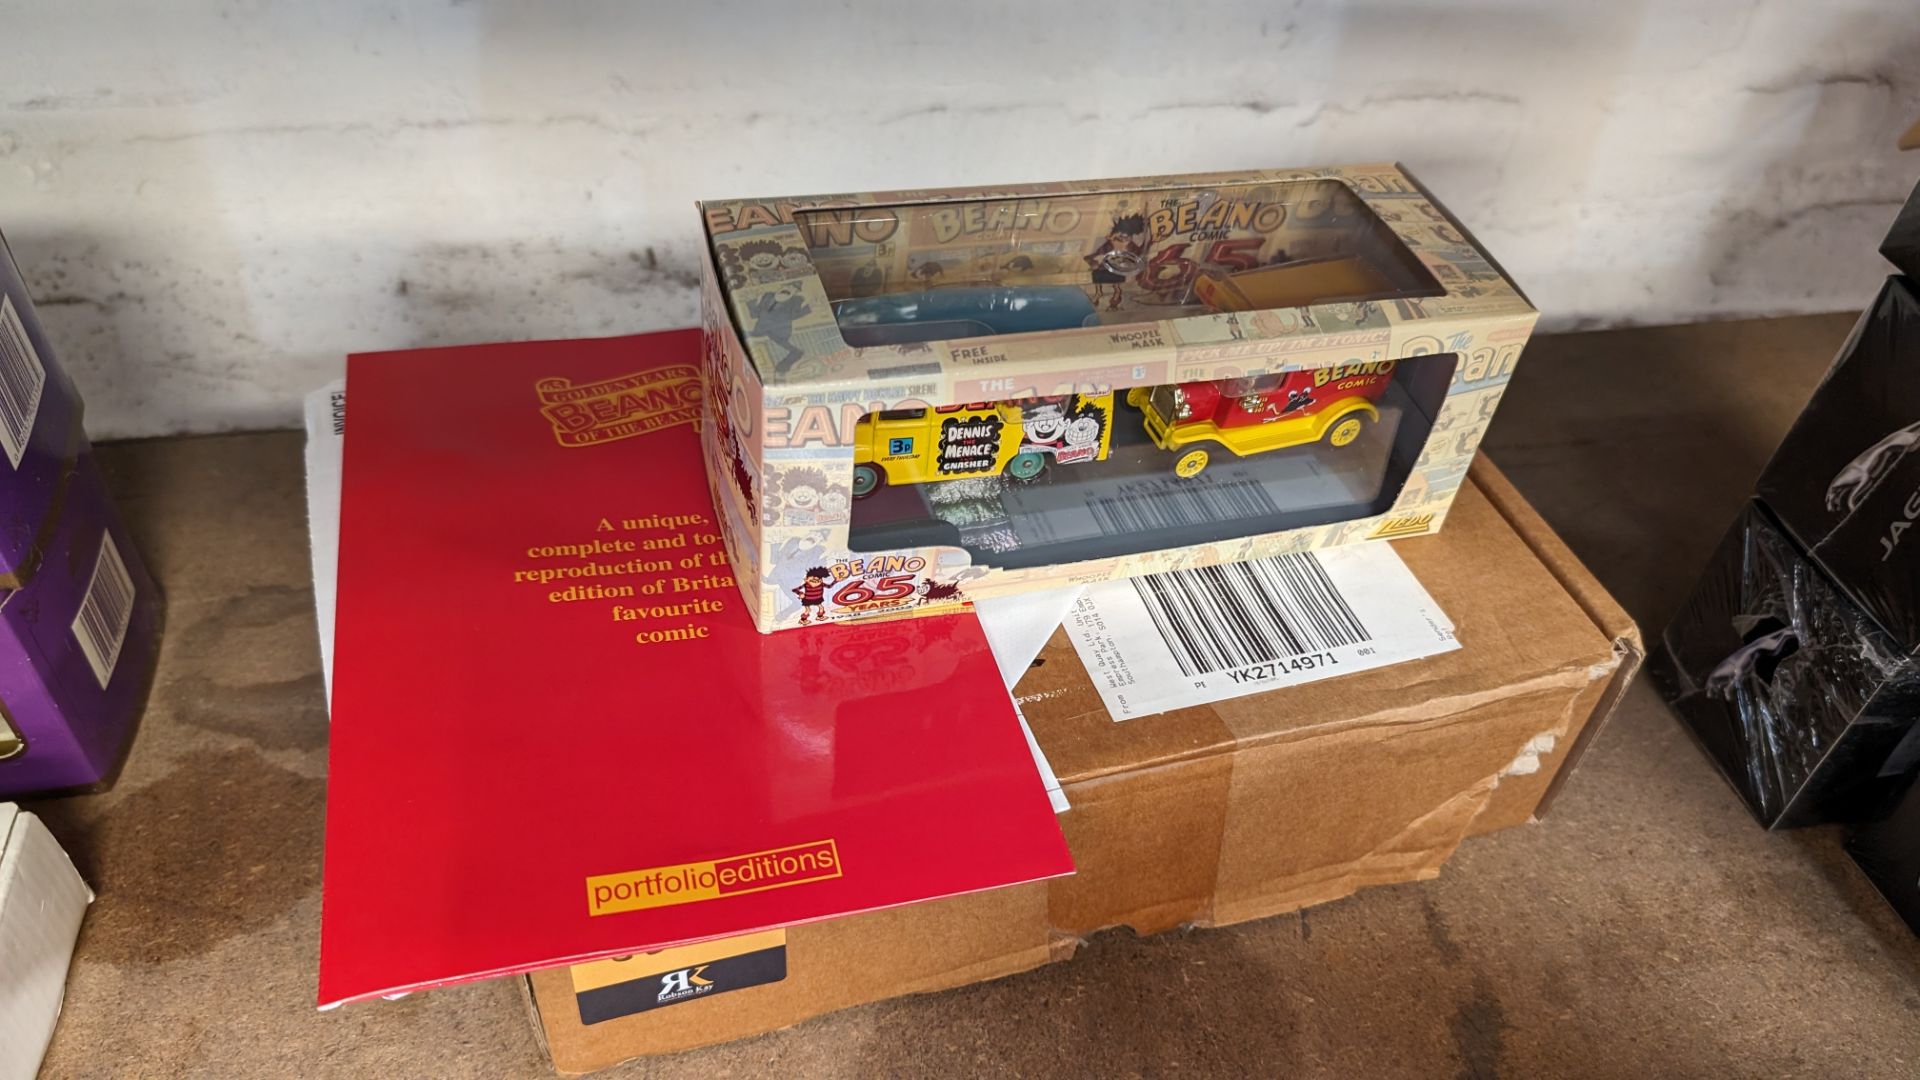 Beano 65th anniversary gift set including reproduction of the first edition of the comic plus 2 mode - Image 2 of 9